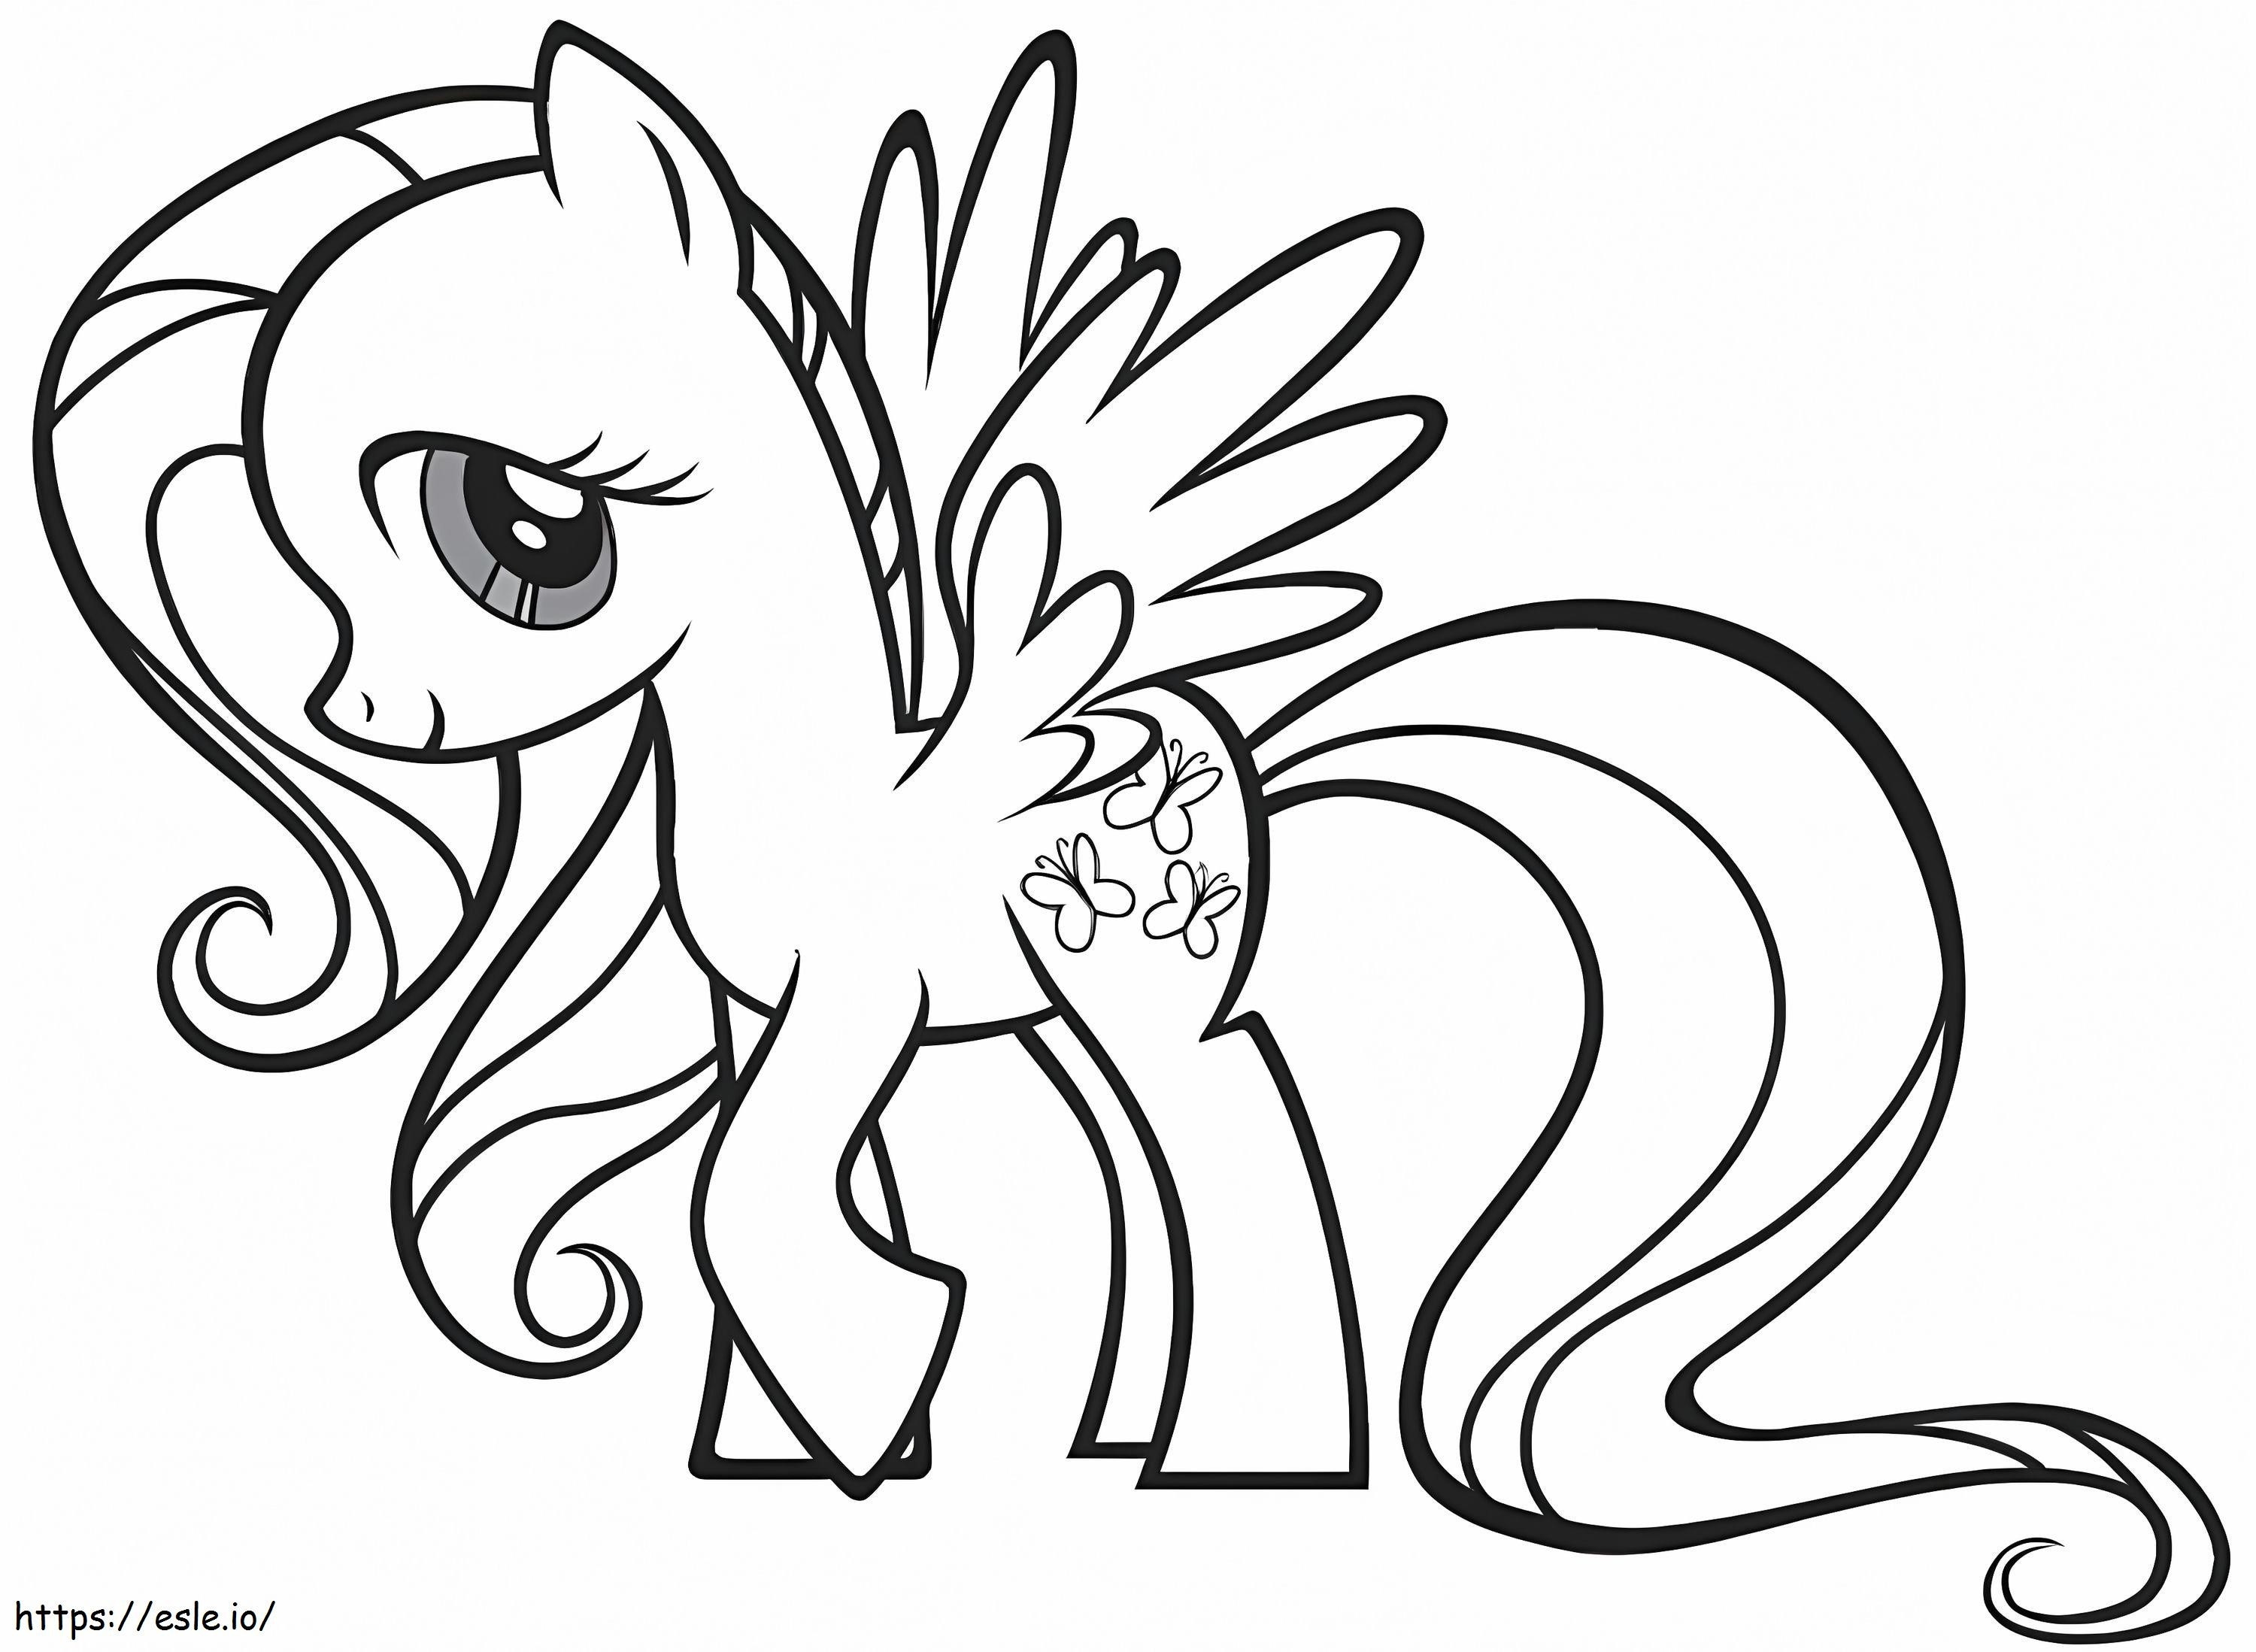 Fluttershy 1 coloring page